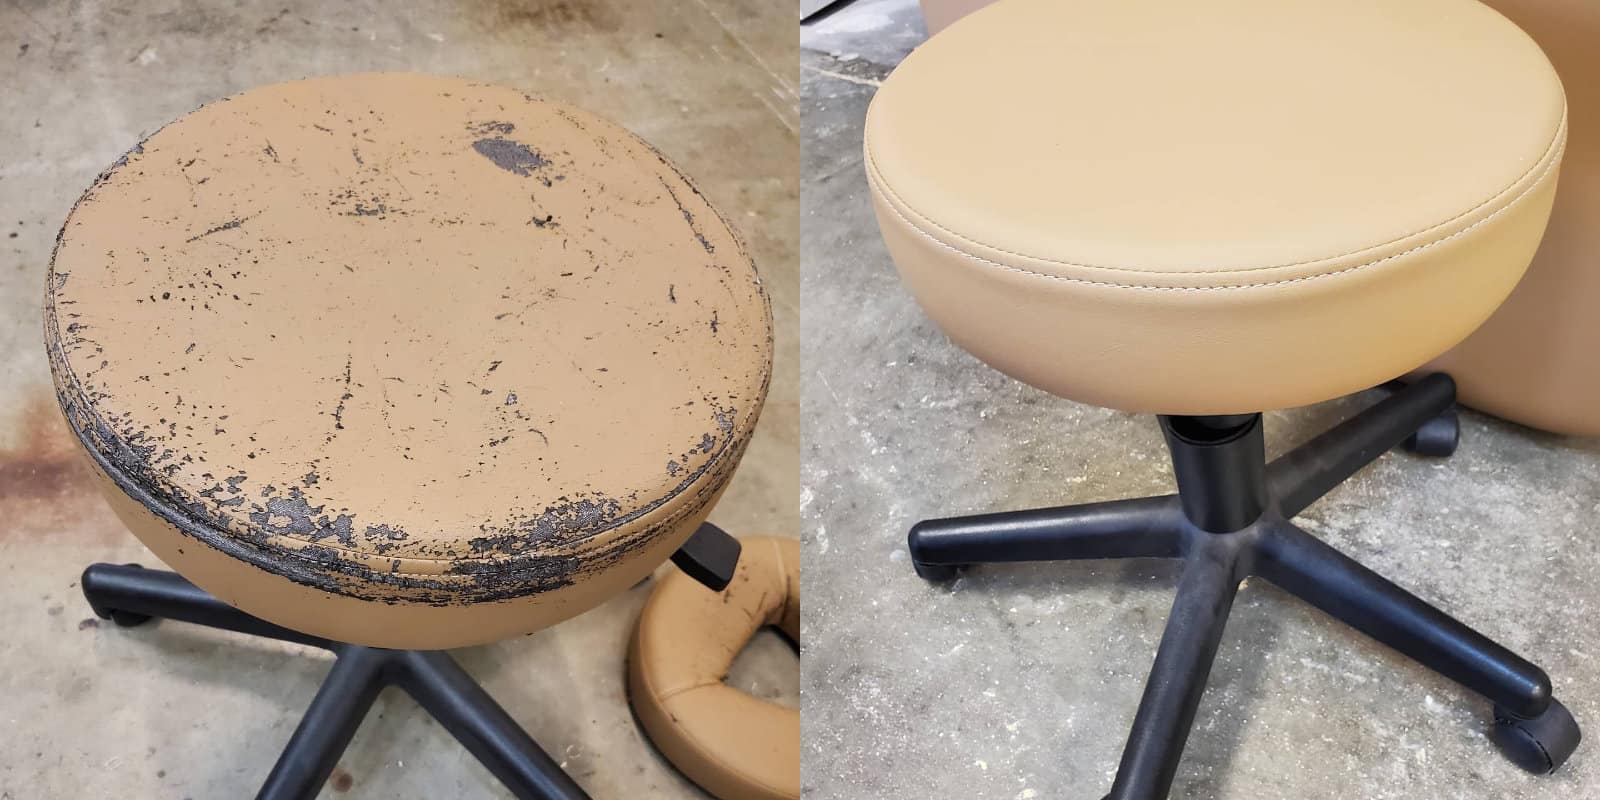 Reupholstered stool